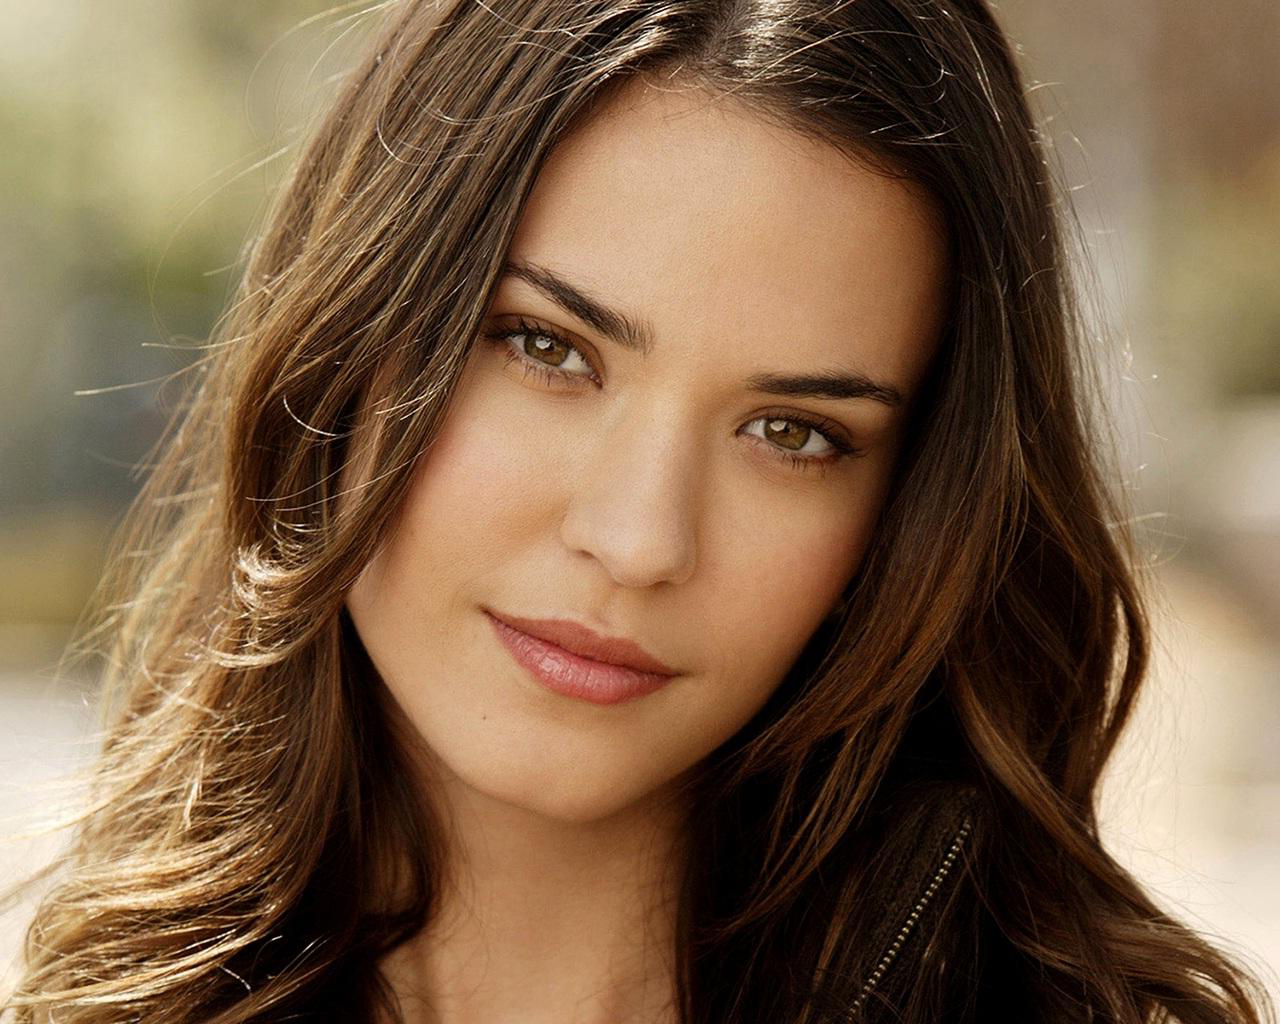 Annable hot odette Odette Annable